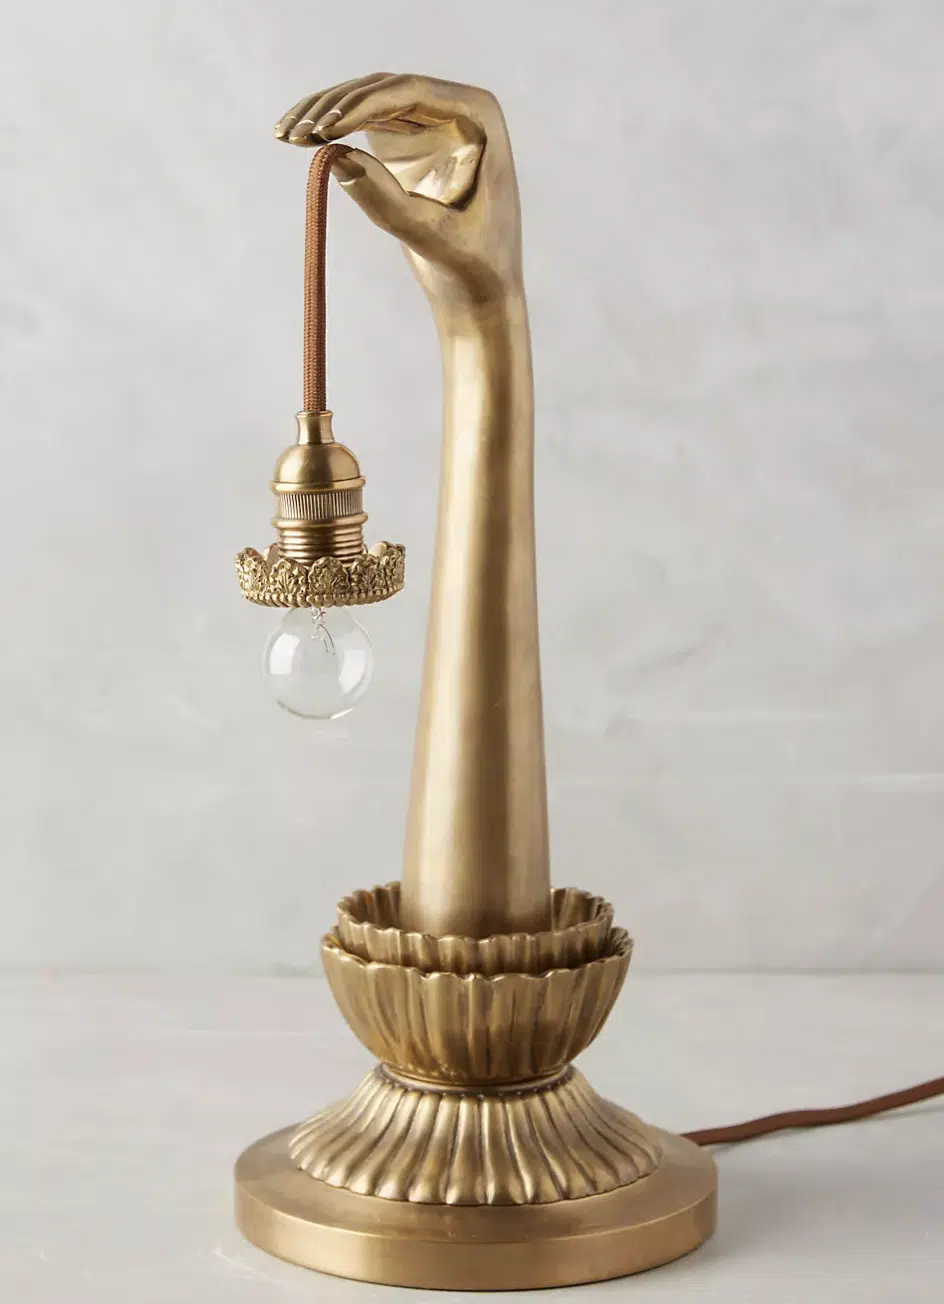 Antique Brass Lamps, by lifestyle blogger What The Fab